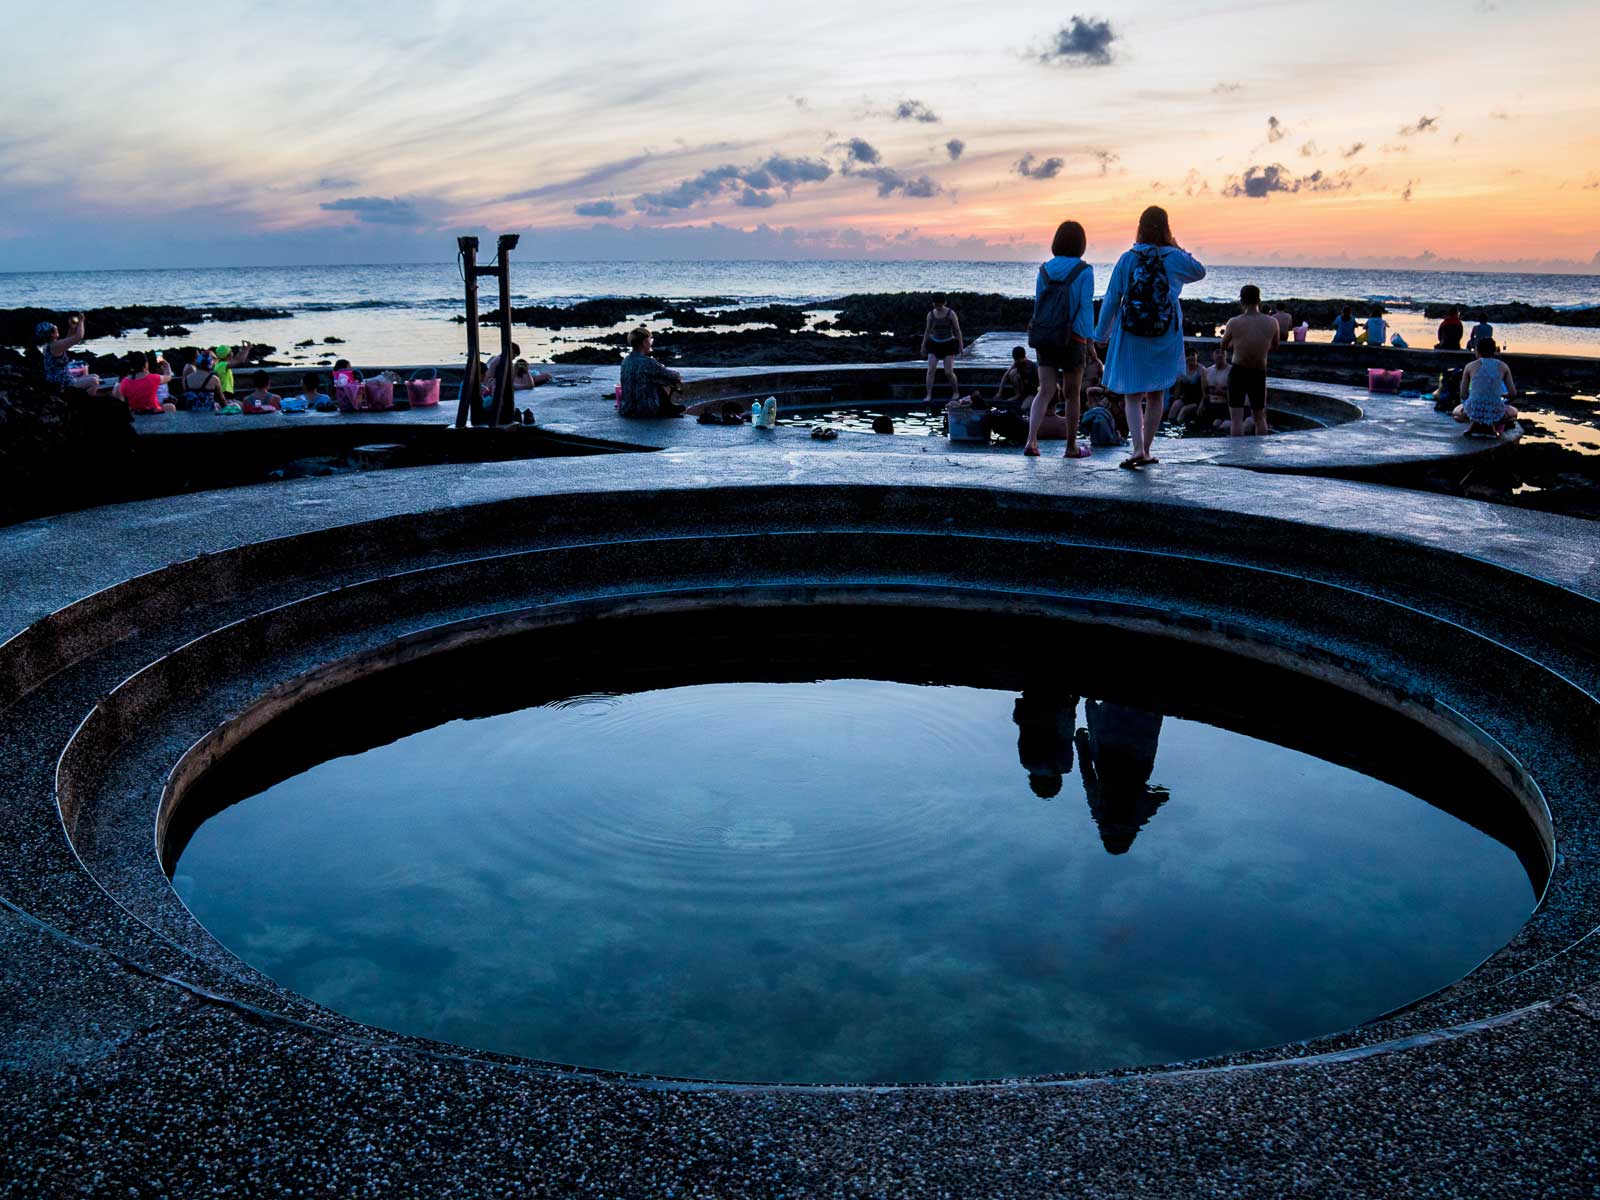 Travelers sit on the coast watching the sun, a circular hot spring pool appears in the foreground.